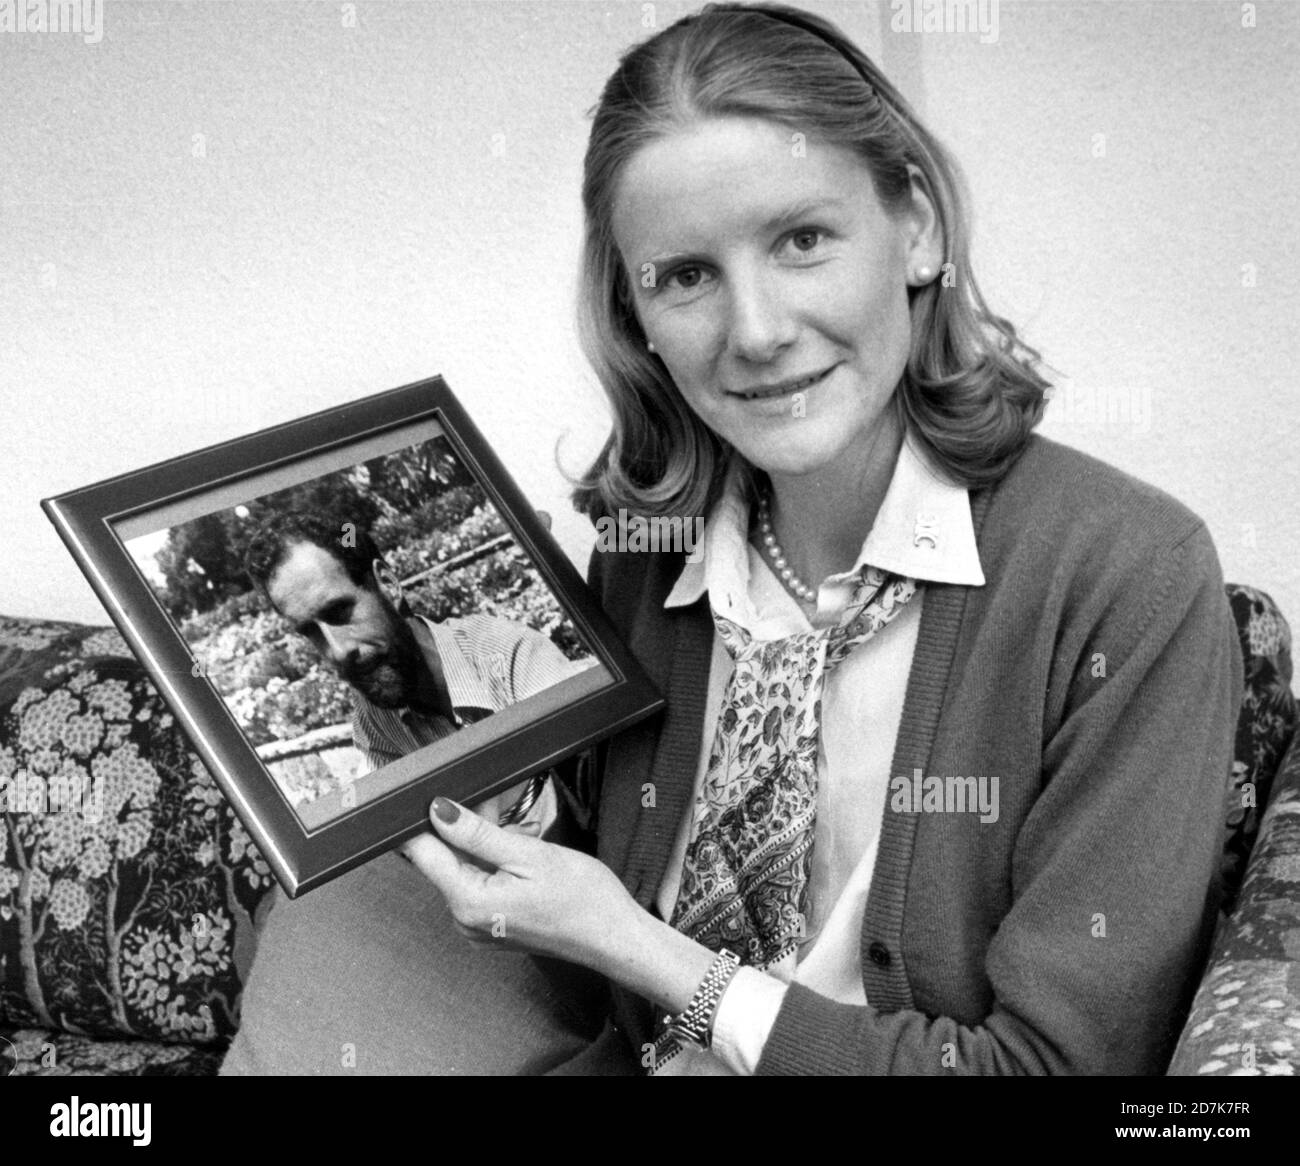 CHRISTINE ROBINSON-MOLTKE (32) FROM PETERSFIELD, HANTS HOLDS A PHOTOGRAPH OF HER HUSBAND LT. CDR. GLEN ROBINSON -MOLTKE WHO WAS KILLED ABOARD HMS COVENTRY DURING THE FALKLANDS WAR. 1982 Stock Photo